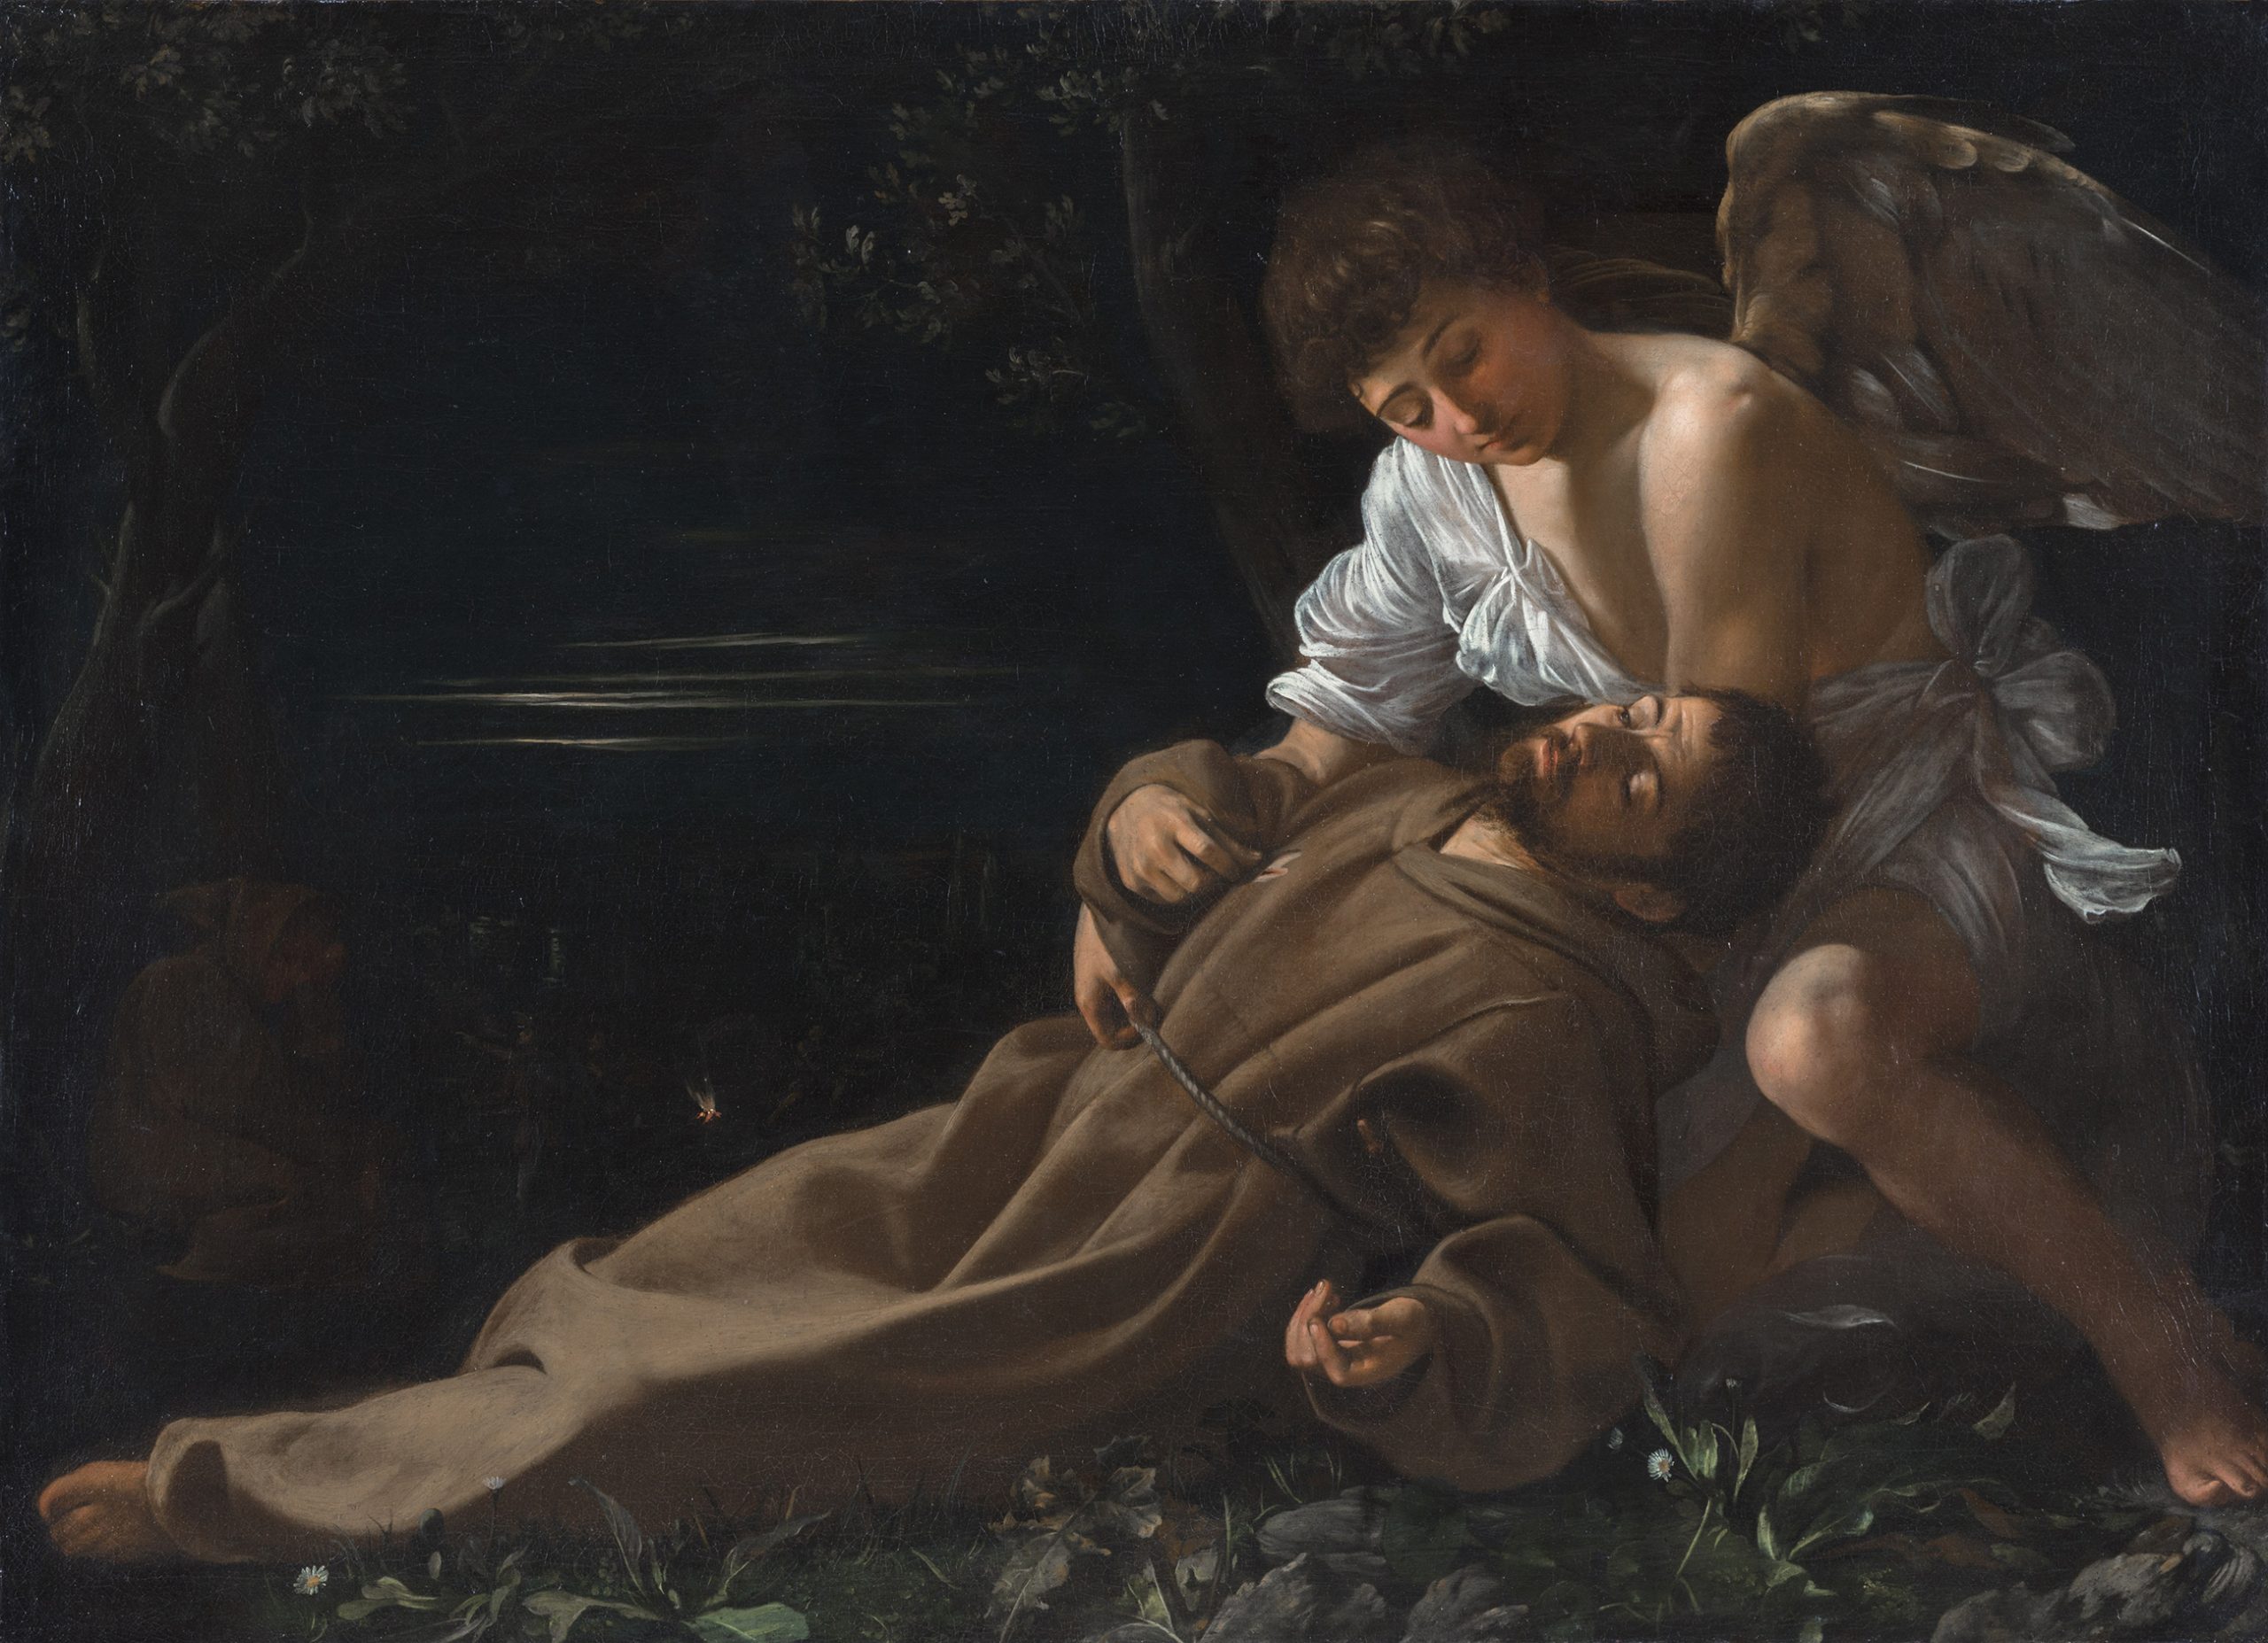 Michelangelo Merisi da Caravaggio, Saint Francis of Assisi in Ecstasy, about 1595–96
Oil on canvas, 37 x 51 inches, Wadsworth Atheneum Museum of Art, Hartford, CT. The Ella Gallup Sumner and Mary Catlin Sumner Collection Fund (1943.222), © Wadsworth Atheneum Museum of Art